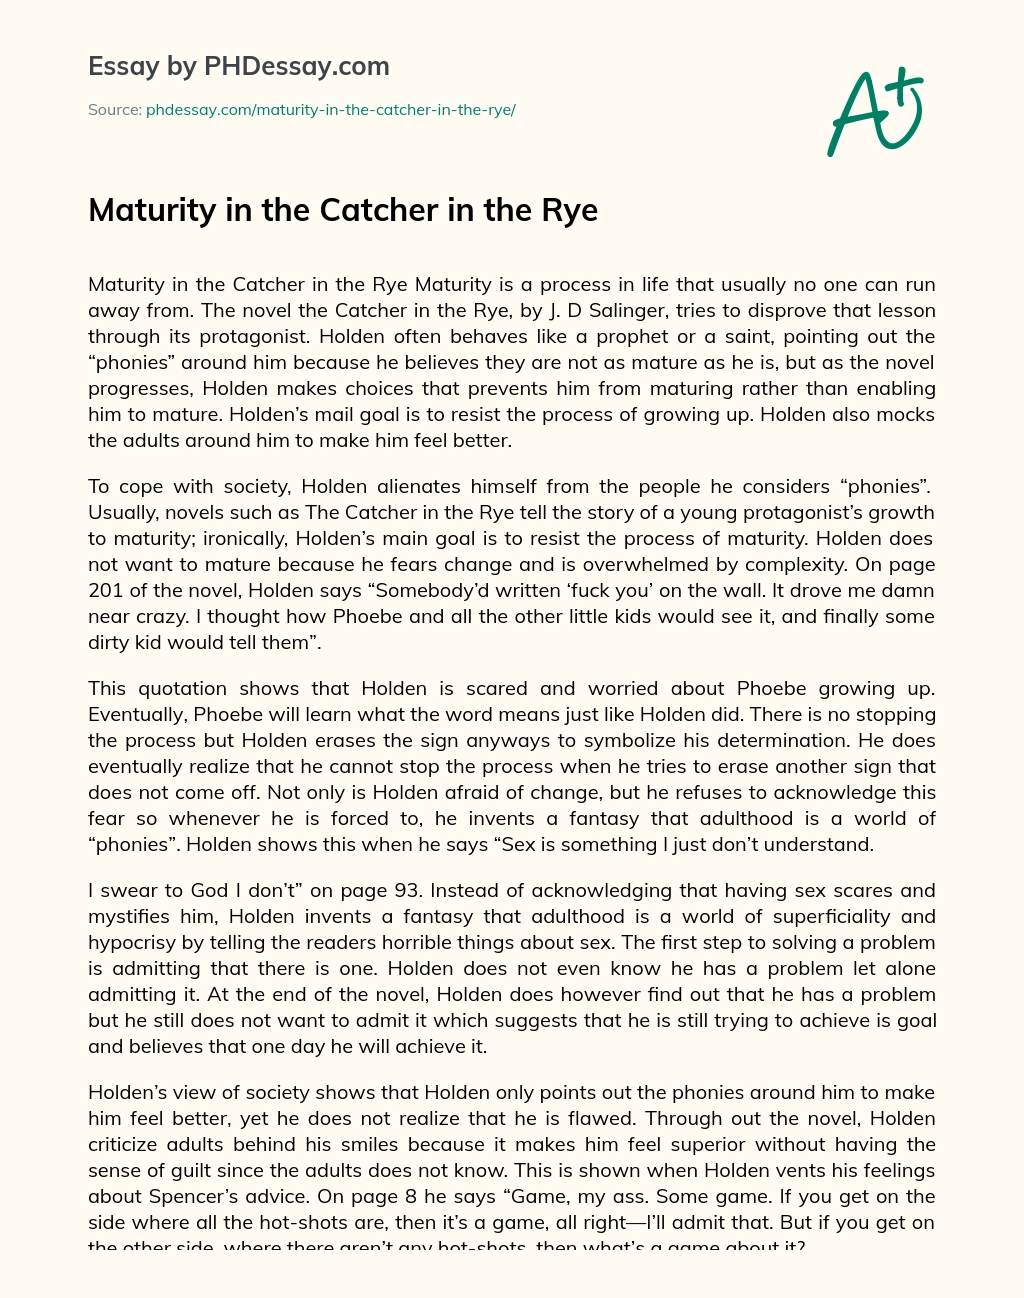 Maturity in the Catcher in the Rye essay